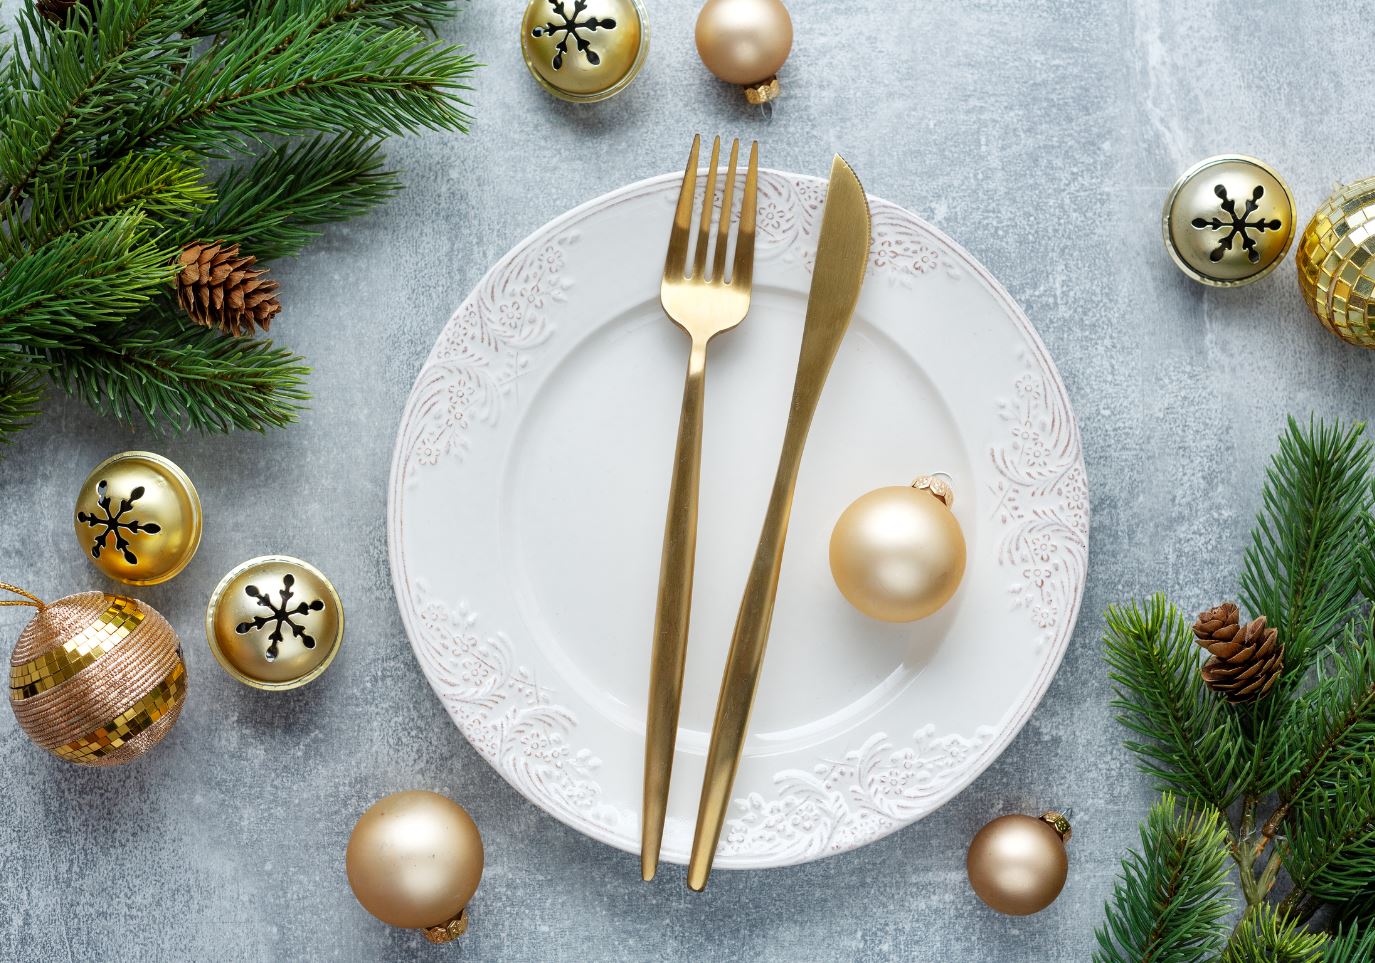 Nourishing Menopause: The Traditional British Christmas Lunch is packed with incredible nutrients essential to supporting a healthy and happy menopause.